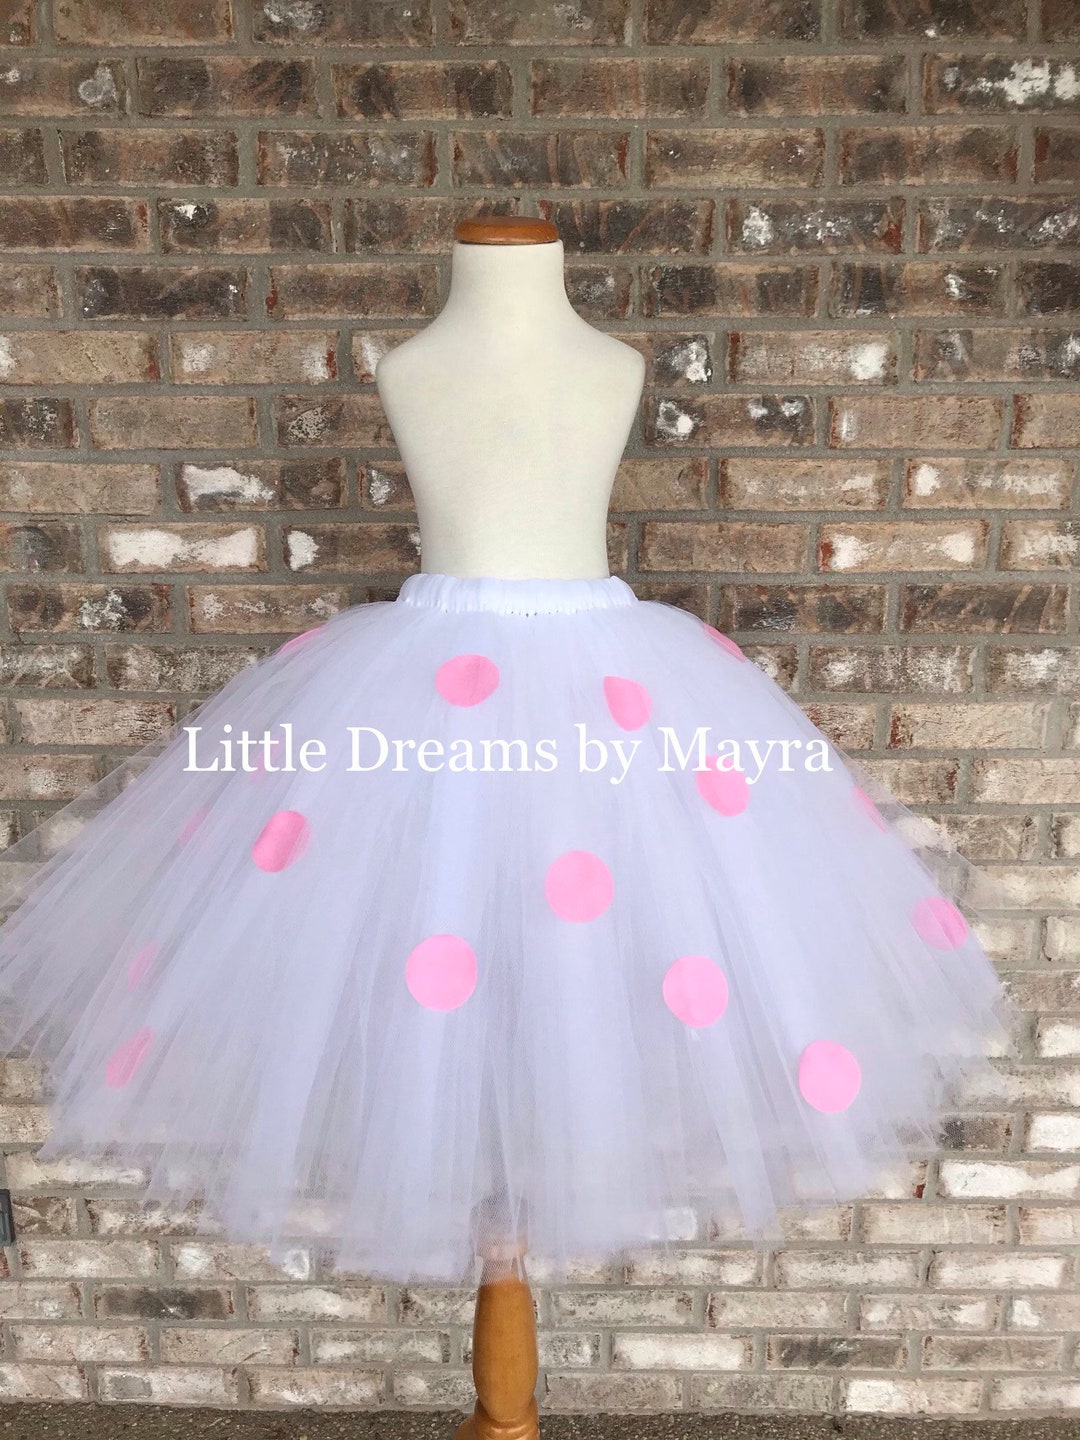 White Tulle Maxi Skirt, Adult Tutu, Any size, Any Length, Any Color